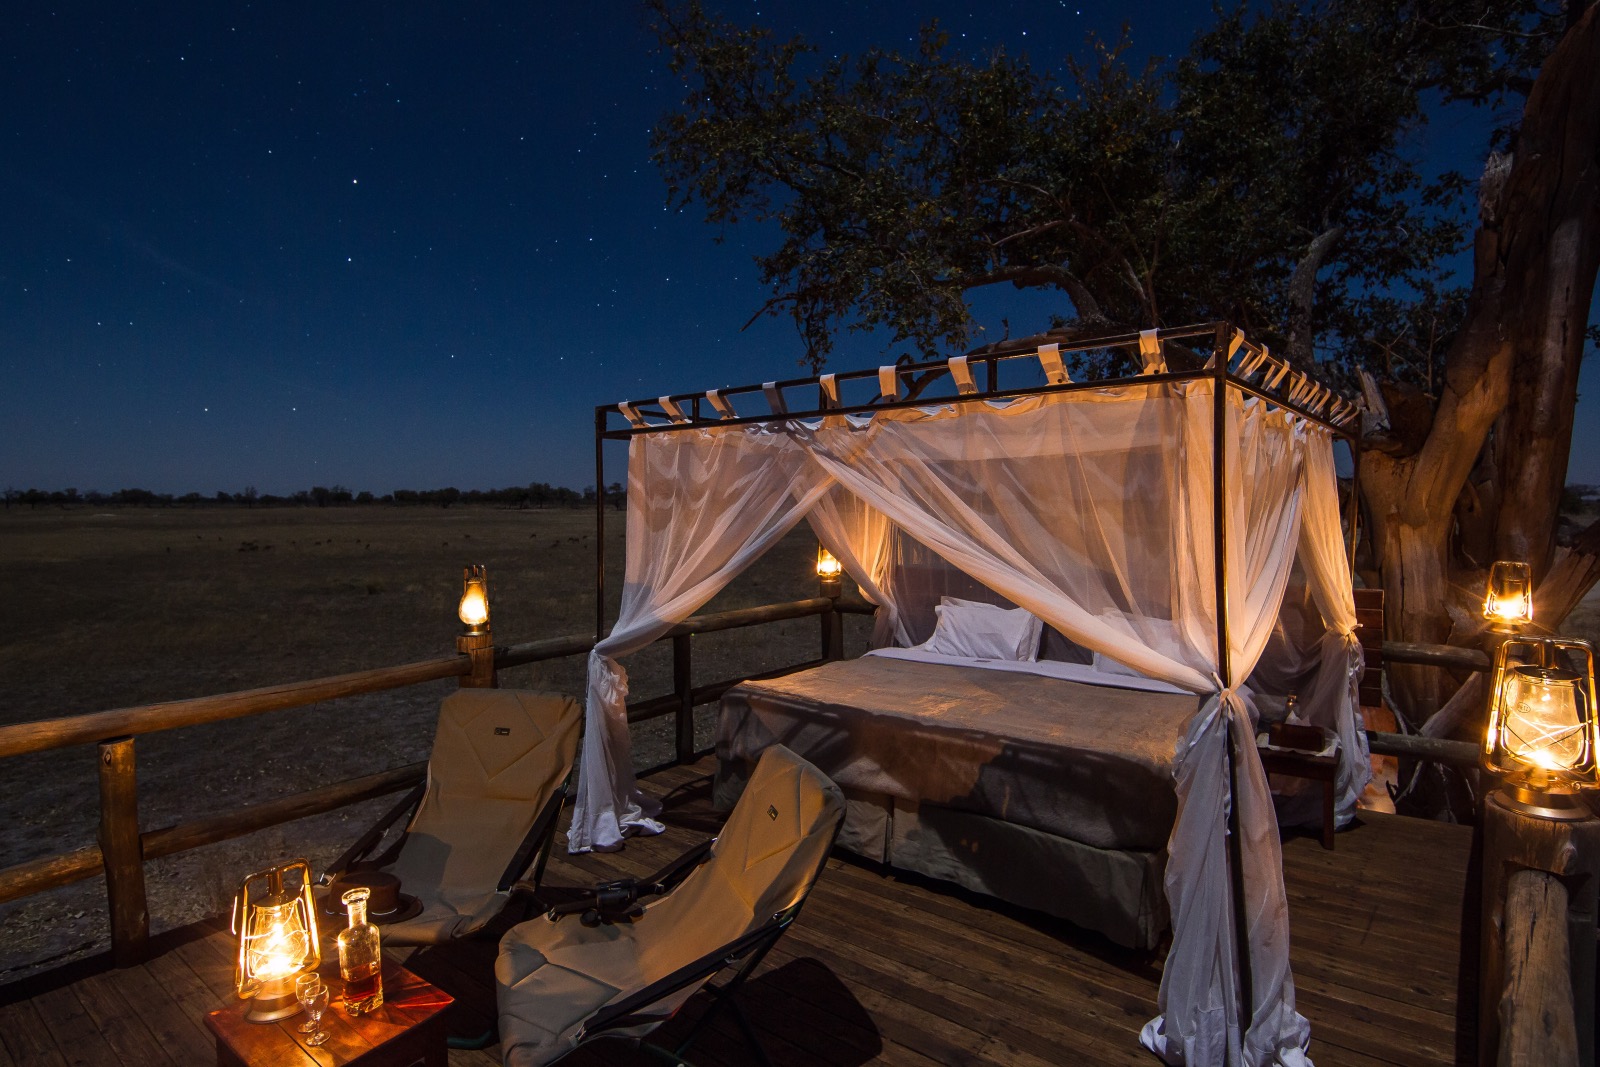 A romantic setting of a bed under the stars in wild Botswana